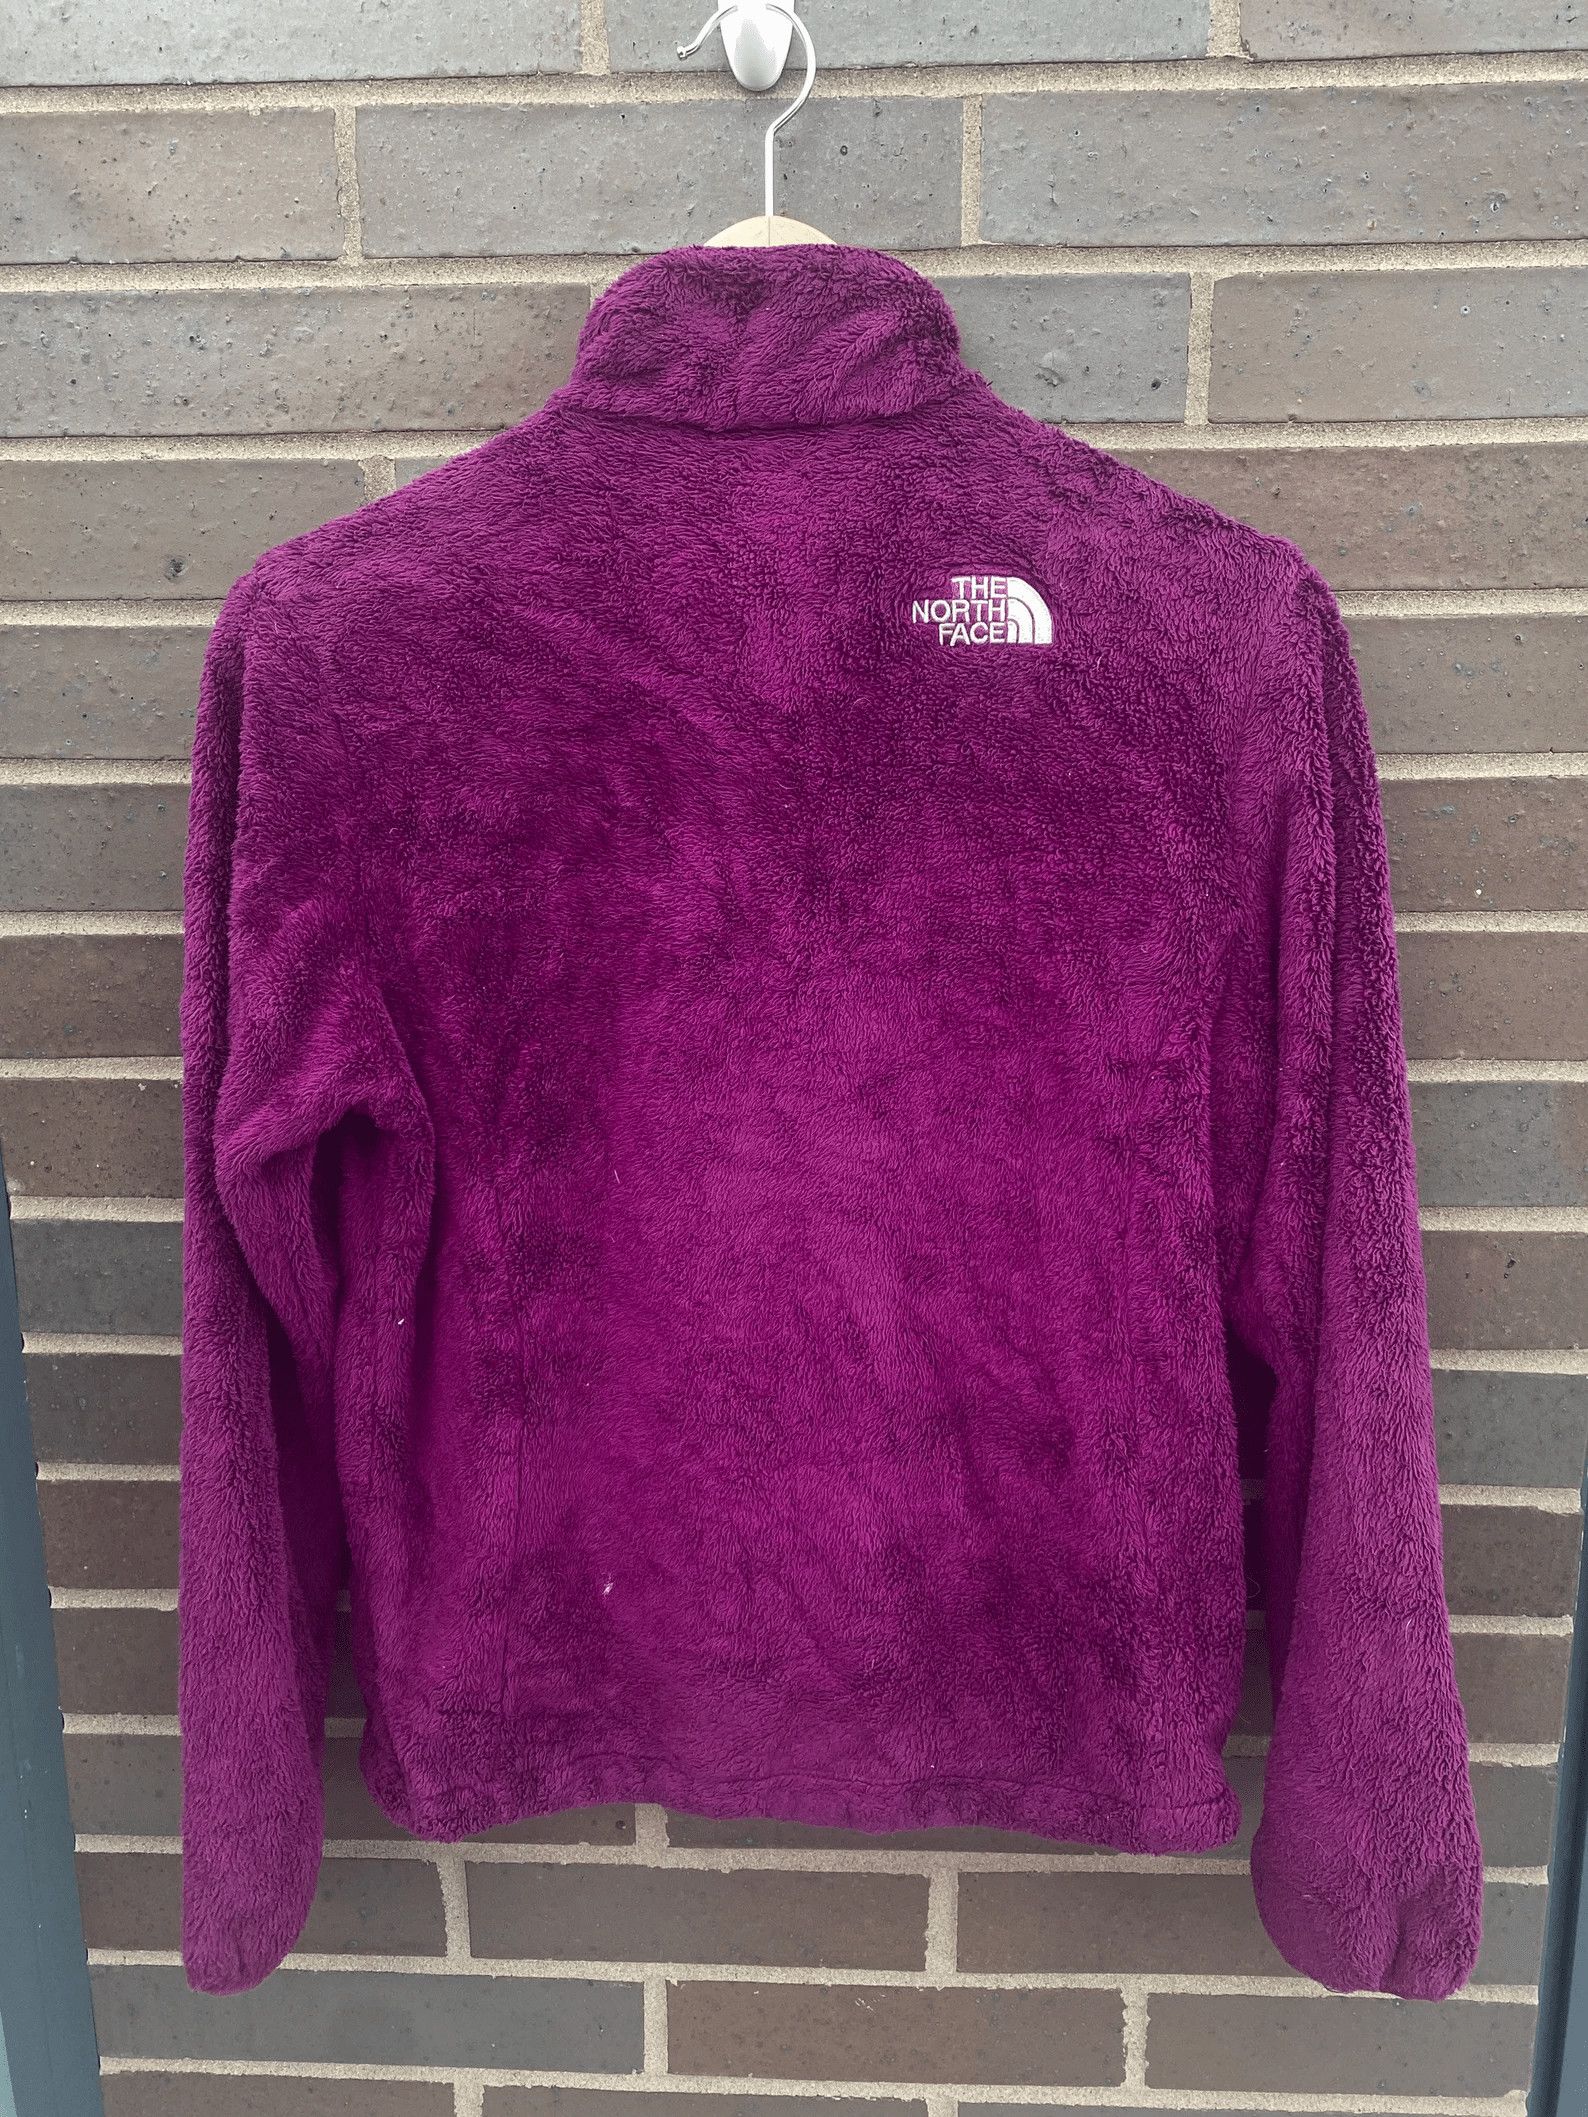 The North Face Vintage 1990s The North Face Pile Fleece Sweatshirt Size S / US 4 / IT 40 - 2 Preview